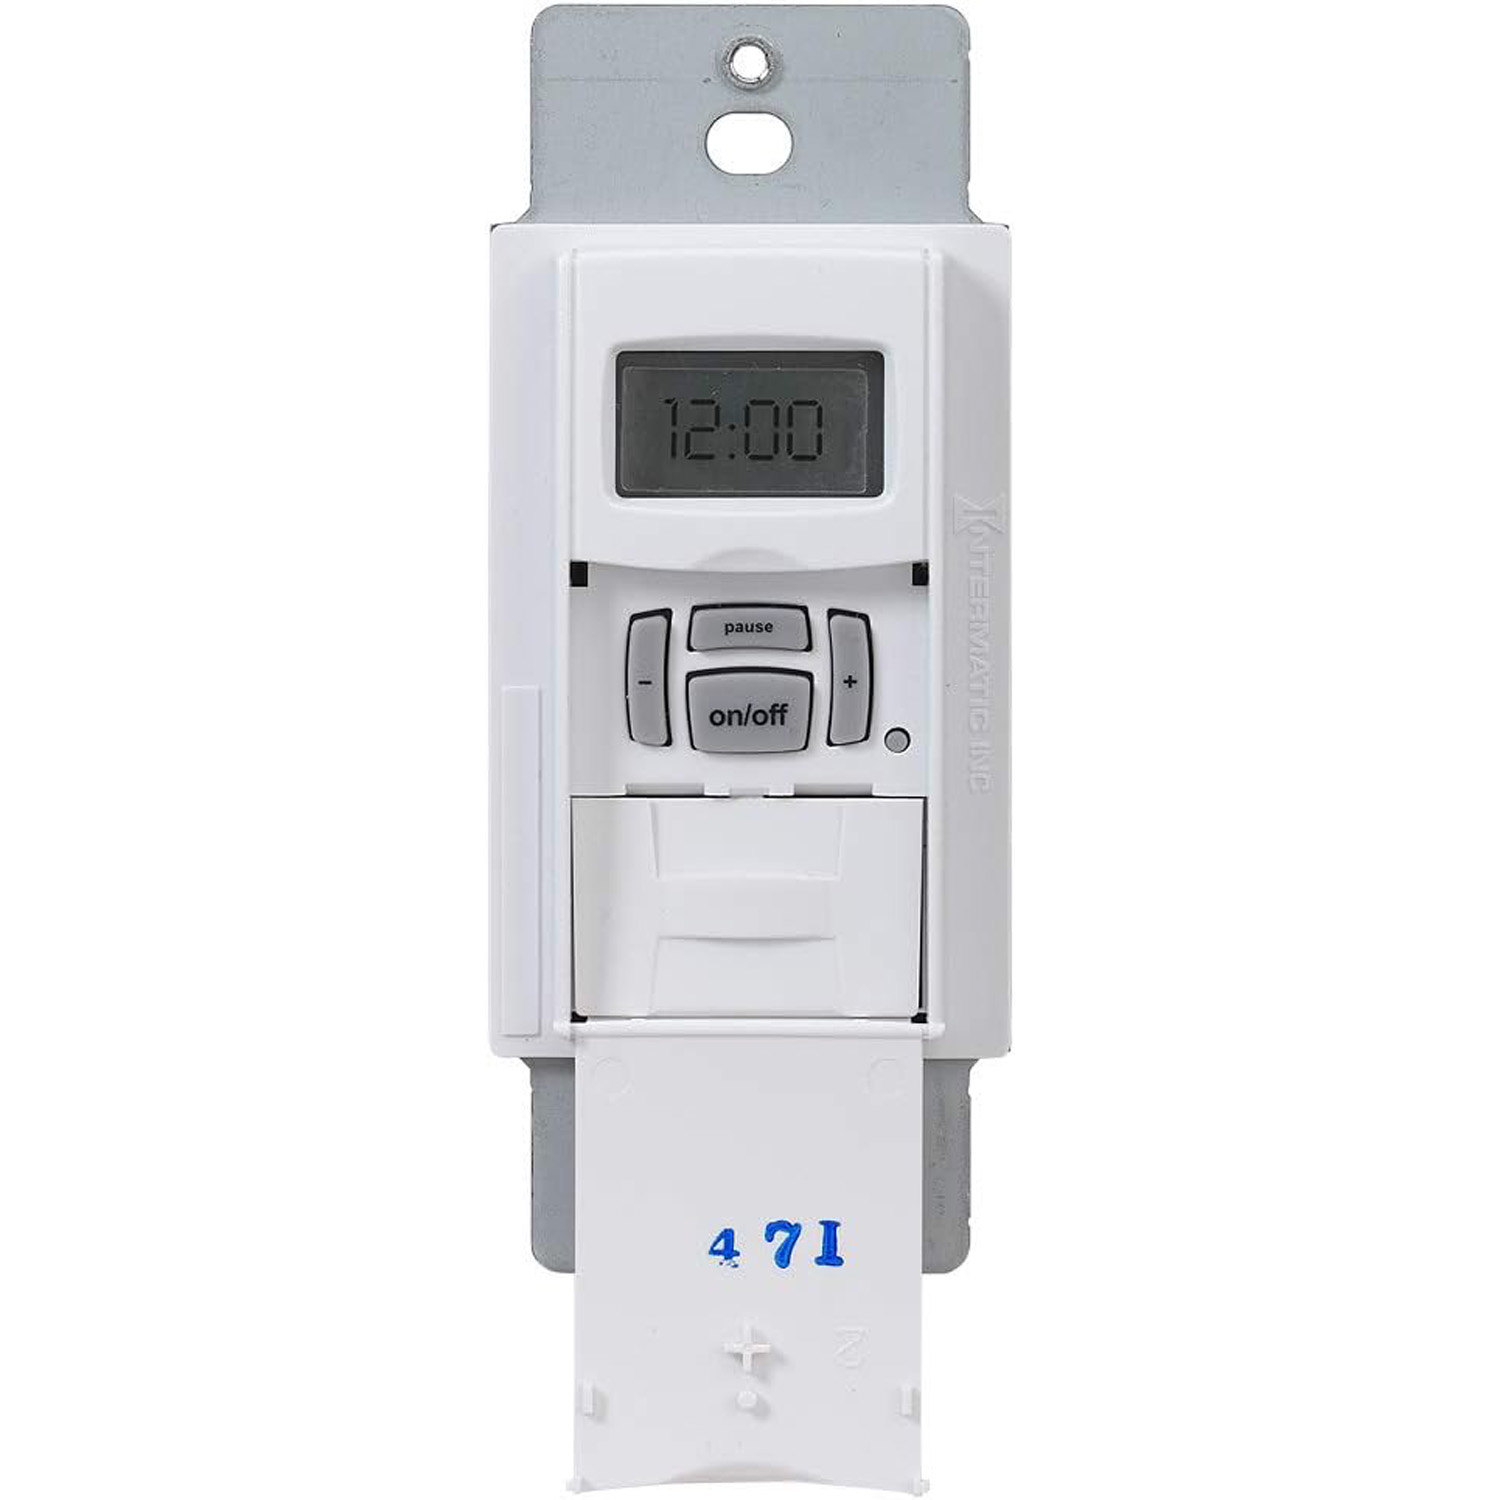 Intermatic EI400WC Programmable Electronic Countdown In-Wall Timer, White image 1